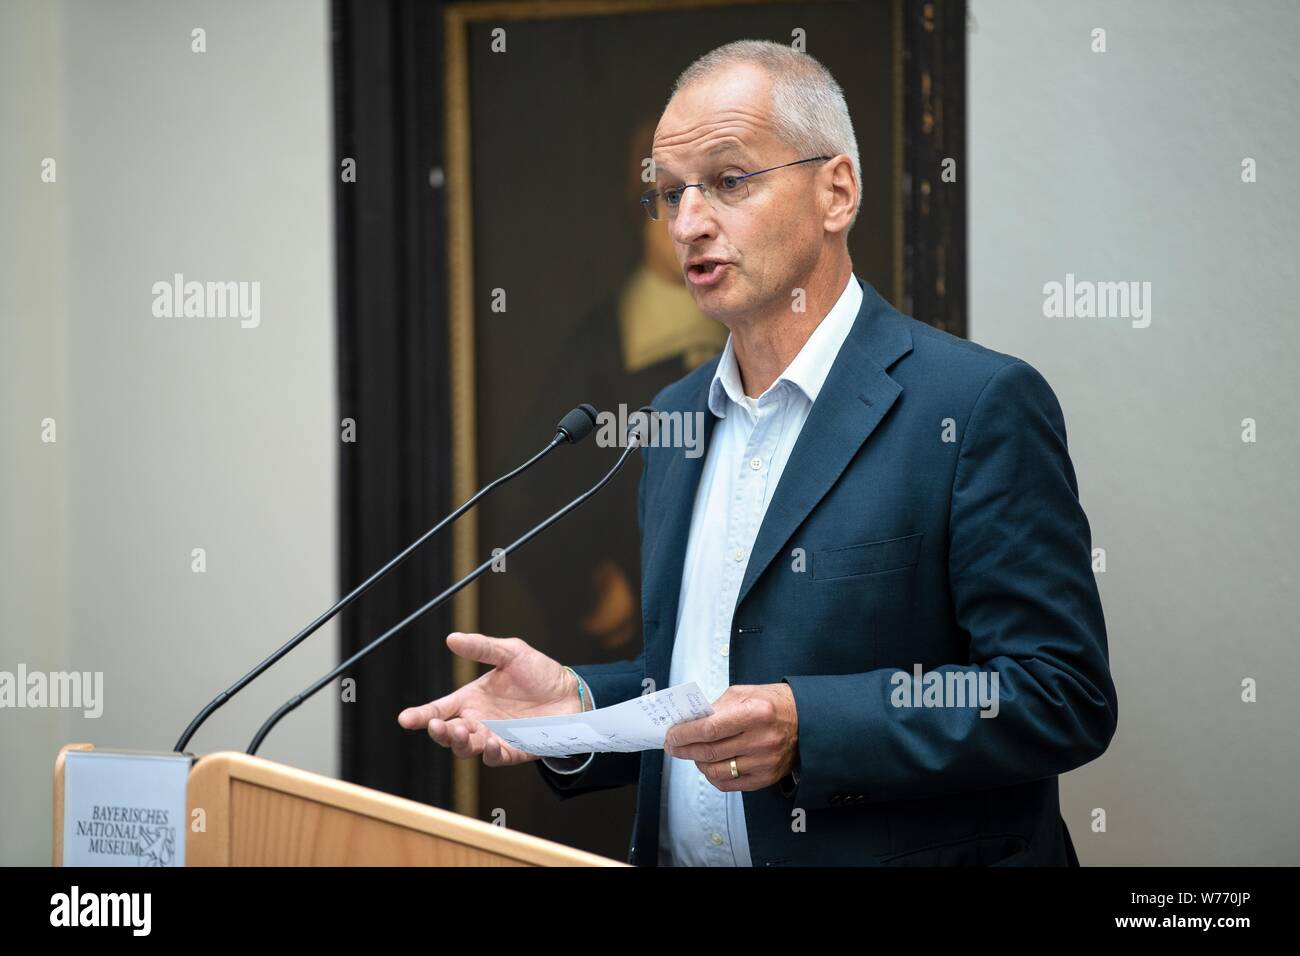 Munich, Germany. 05th Aug, 2019. Hardy Langer, representative of the community of heirs, speaks at the event on the restitution of nine Nazi looted works of art. Five paintings, three colour engravings and a wooden panel had been confiscated by the Gestapo in November 1938. The Munich collections have now returned the works to the heirs of Julius and Simone Davidsohn from Munich. Credit: Sina Schuldt/dpa/Alamy Live News Stock Photo